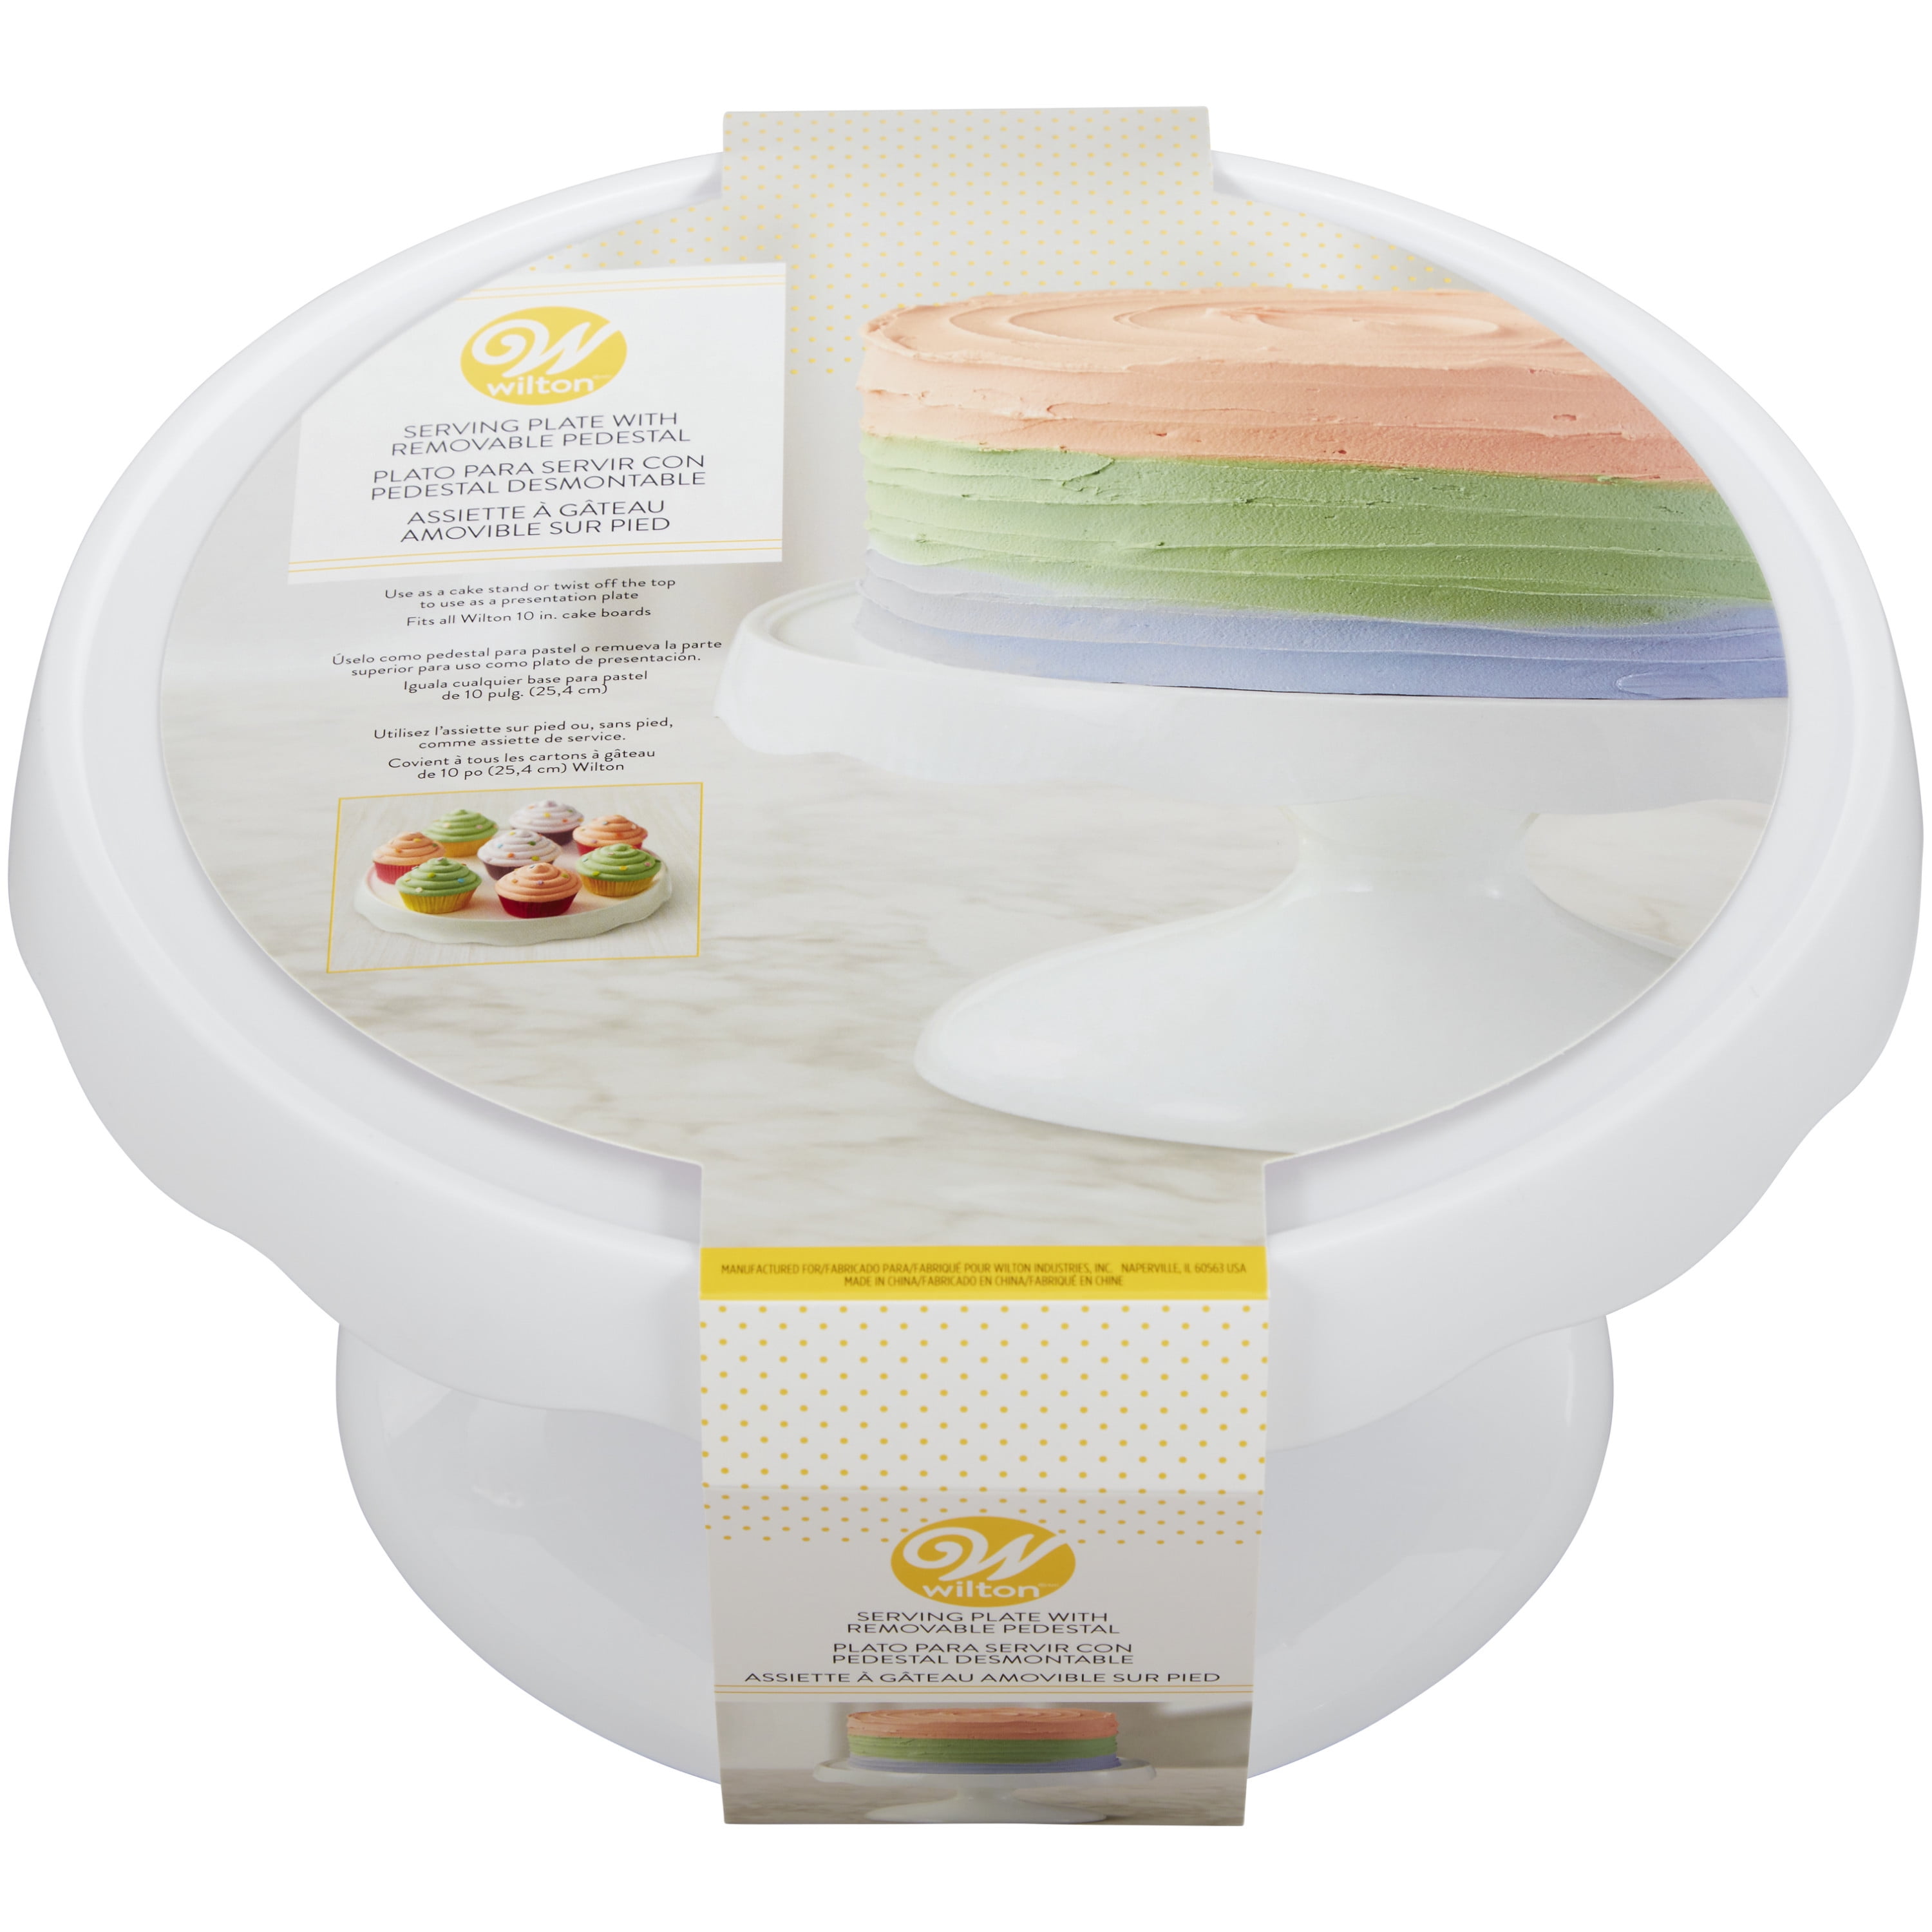 Wilton 2-in-1 Pedestal Cake Stand and Serving Plate, 10-Inch Round Stand